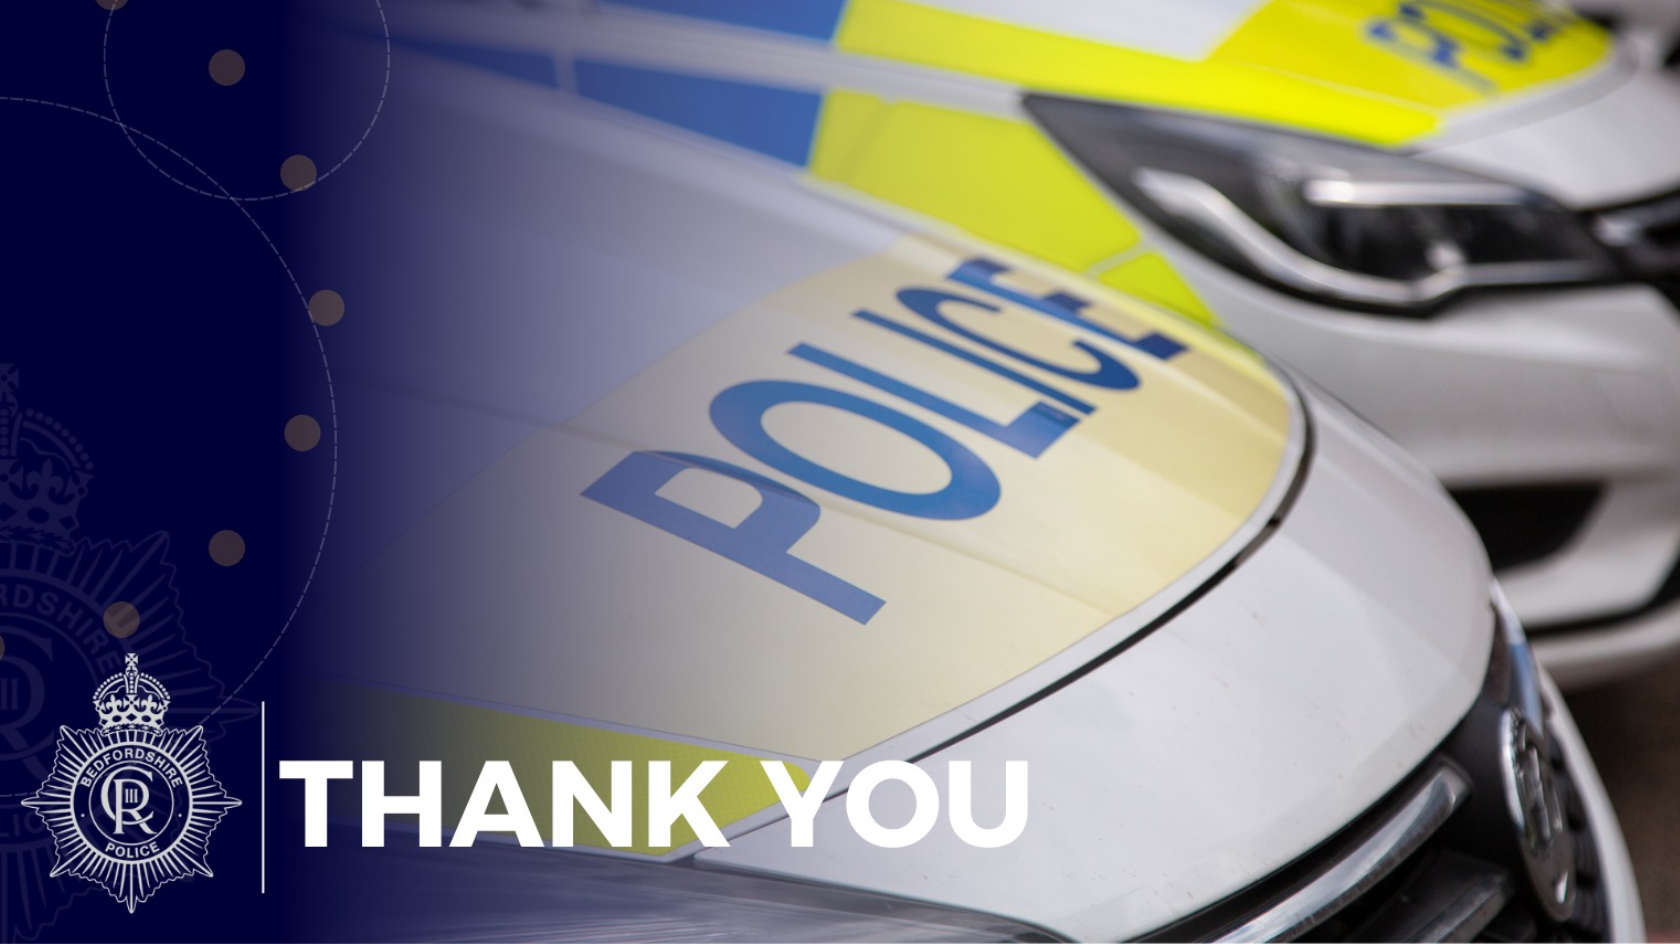 Updated Missing Woman Found Safe And Well Mkfm 1063fm Radio Made In Milton Keynes 